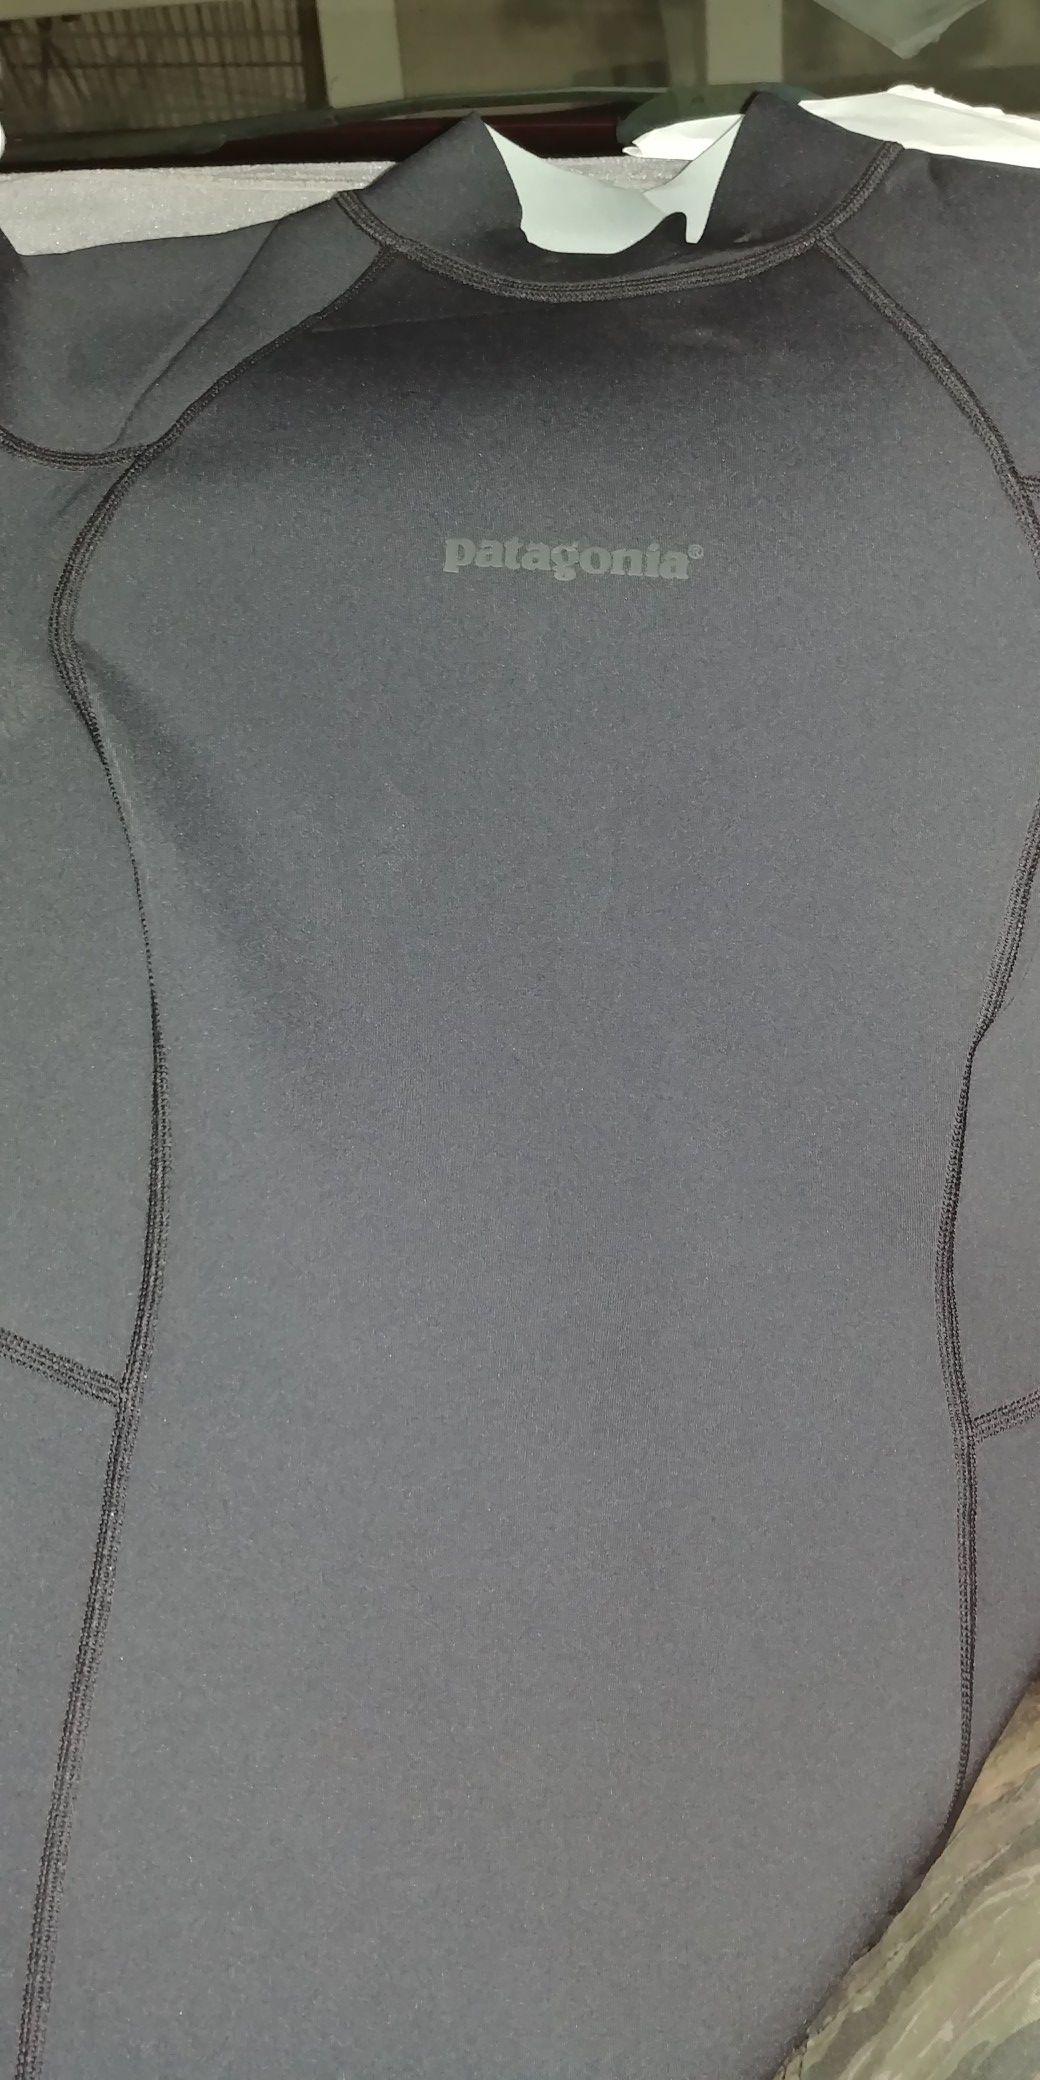 Women's long sleeve size 12 Patagonia wetsuit top